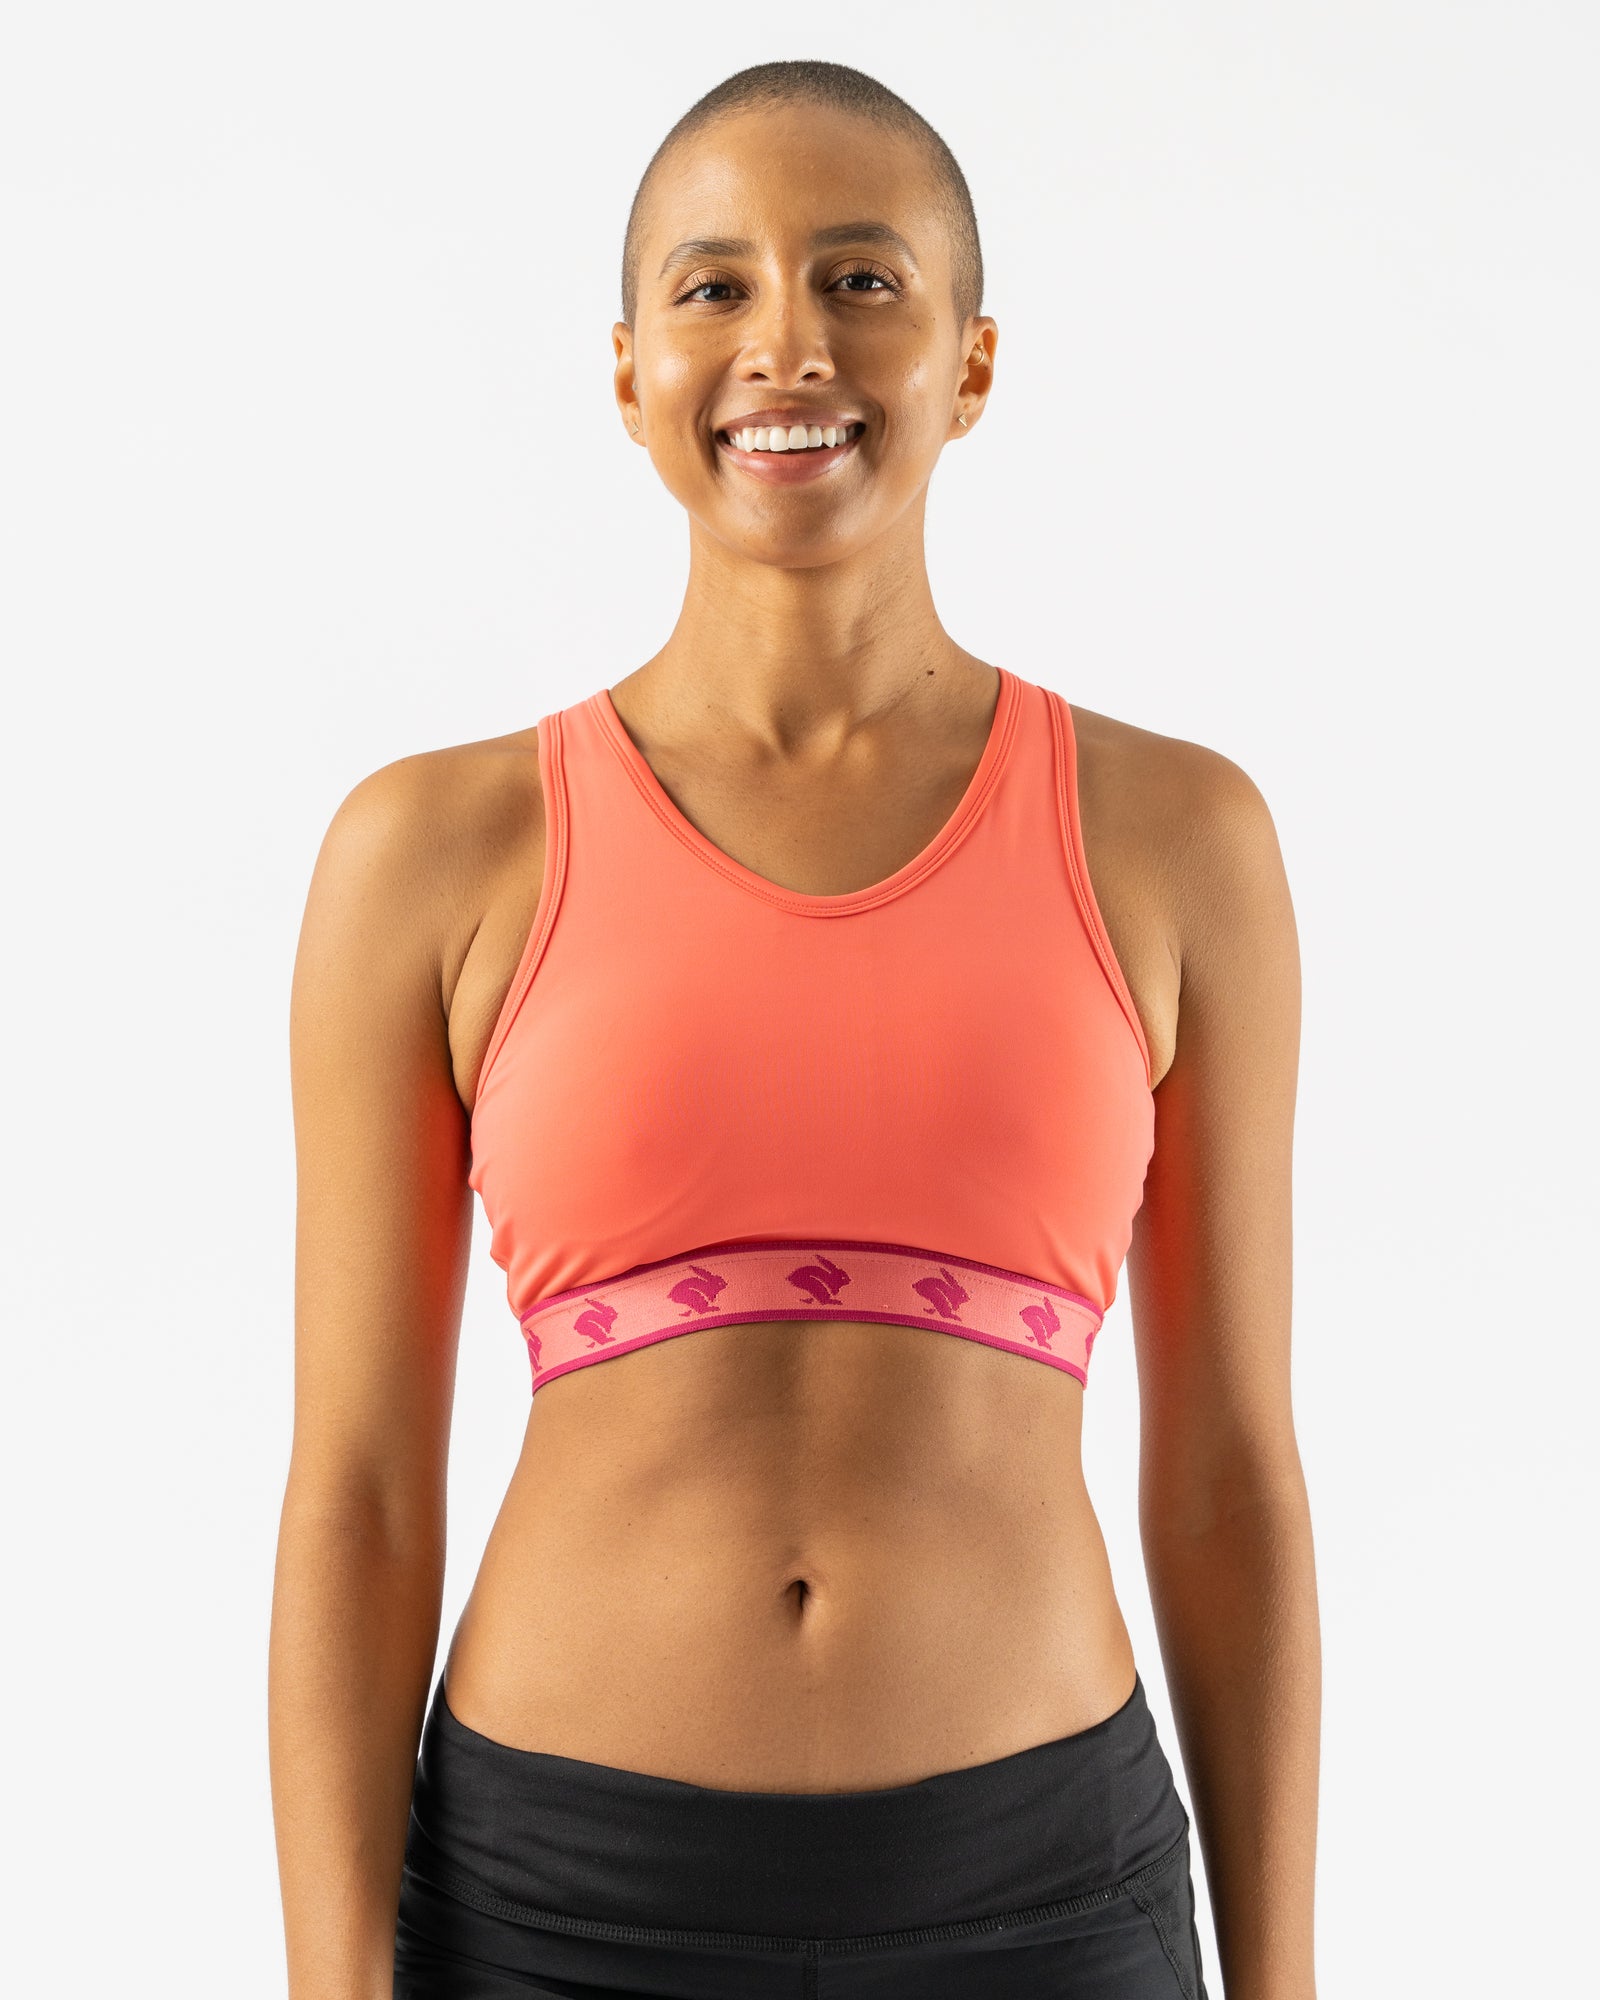 Women's - Sport Bras or Long Sleeves in Black or White or Blue or Red or  Pink